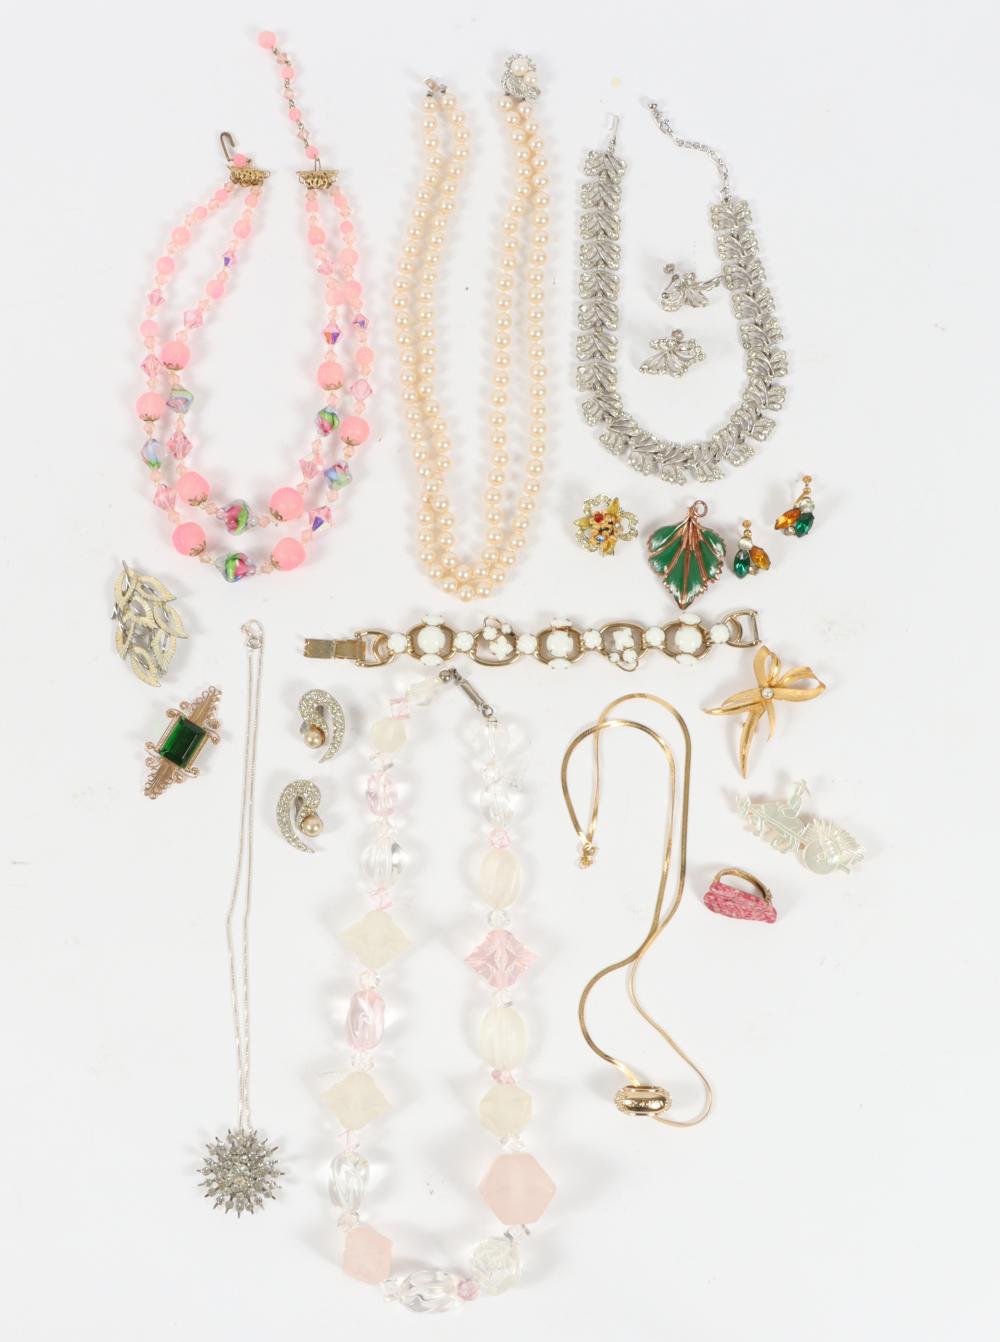 VINTAGE COSTUME JEWELRY GROUP INCLUDING: